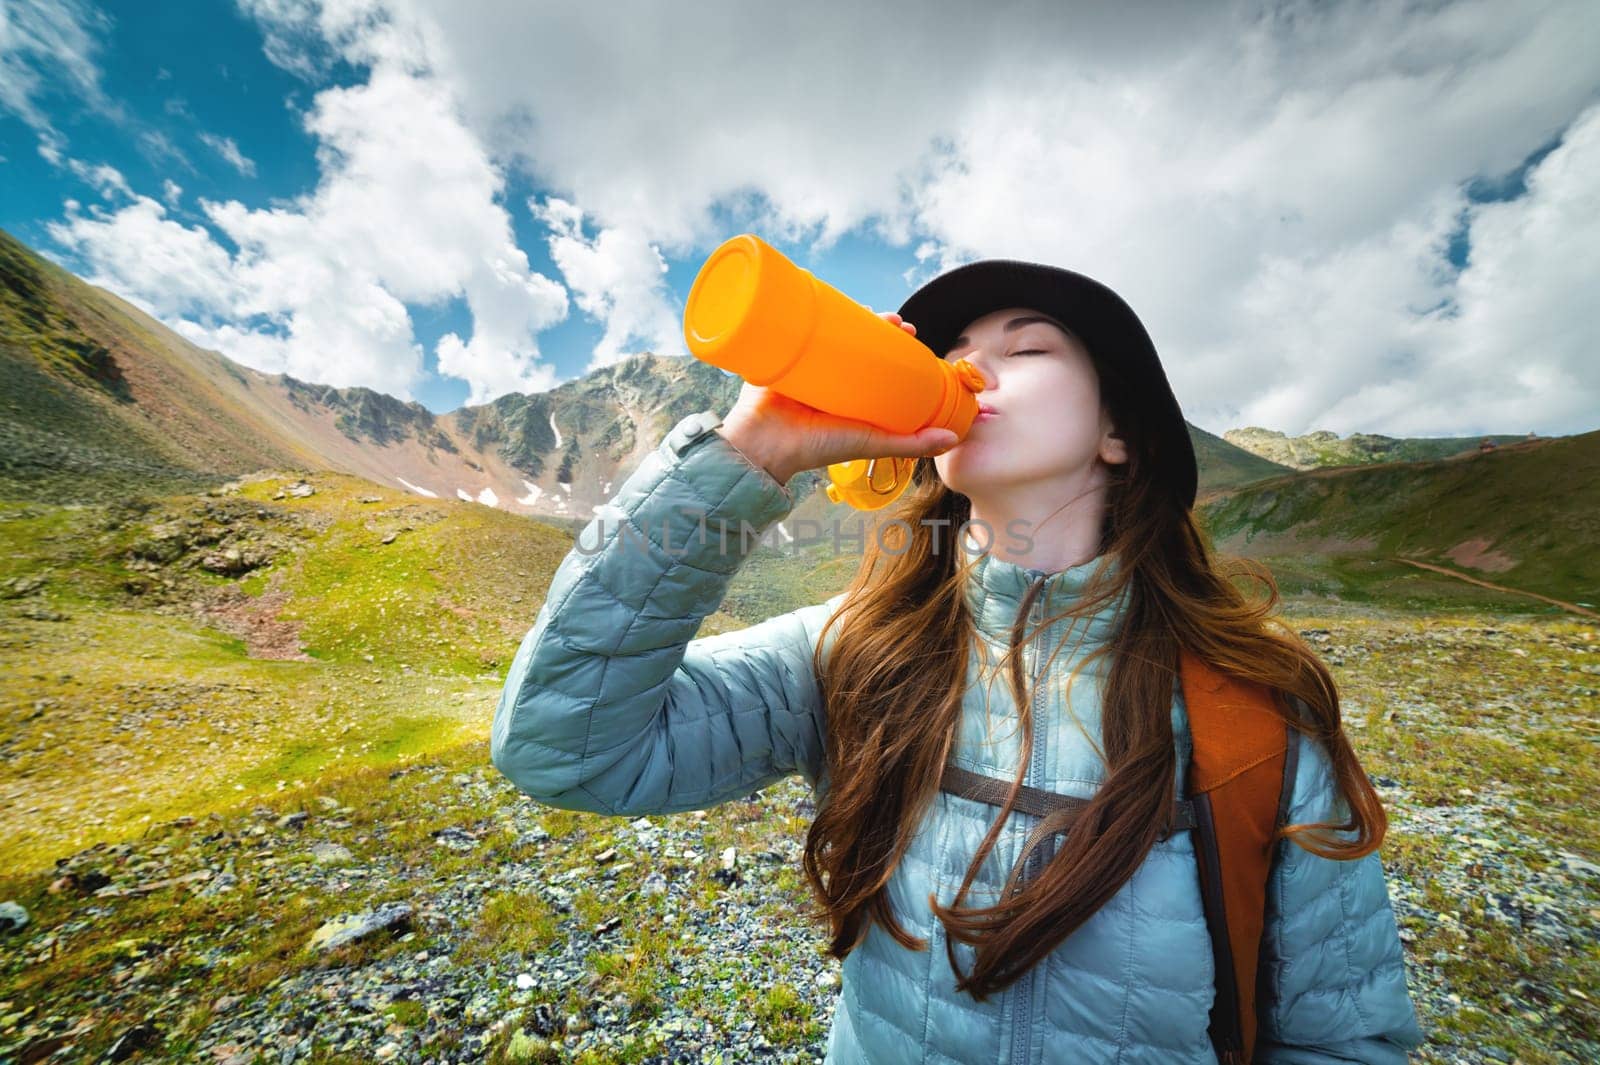 A woman takes a break to drink from a water bottle while hiking. Young hiker drinks water in a mountain valley.